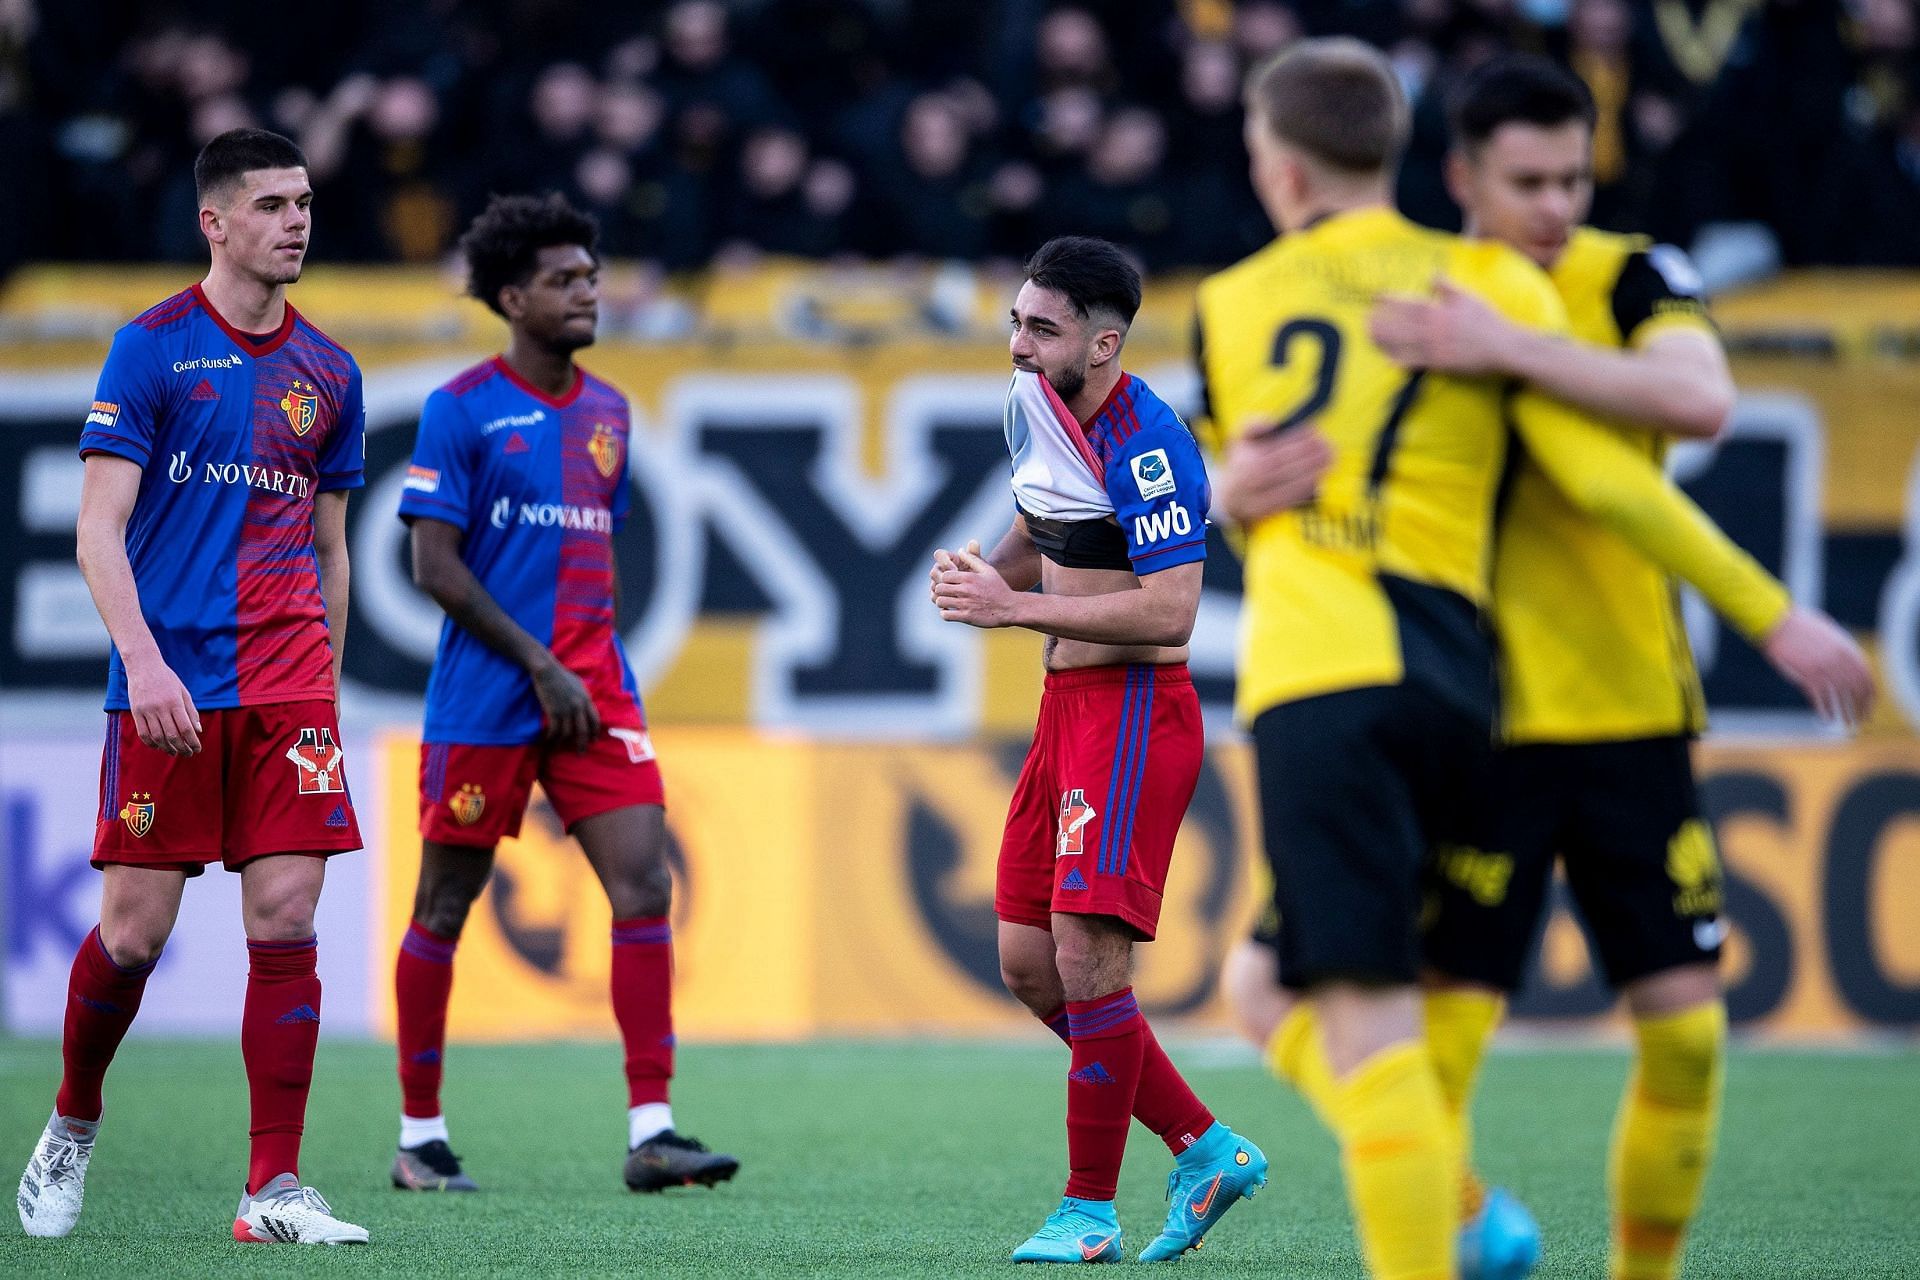 Basel and Young Boys will meet in their Swiss Super League fixture on Sunday